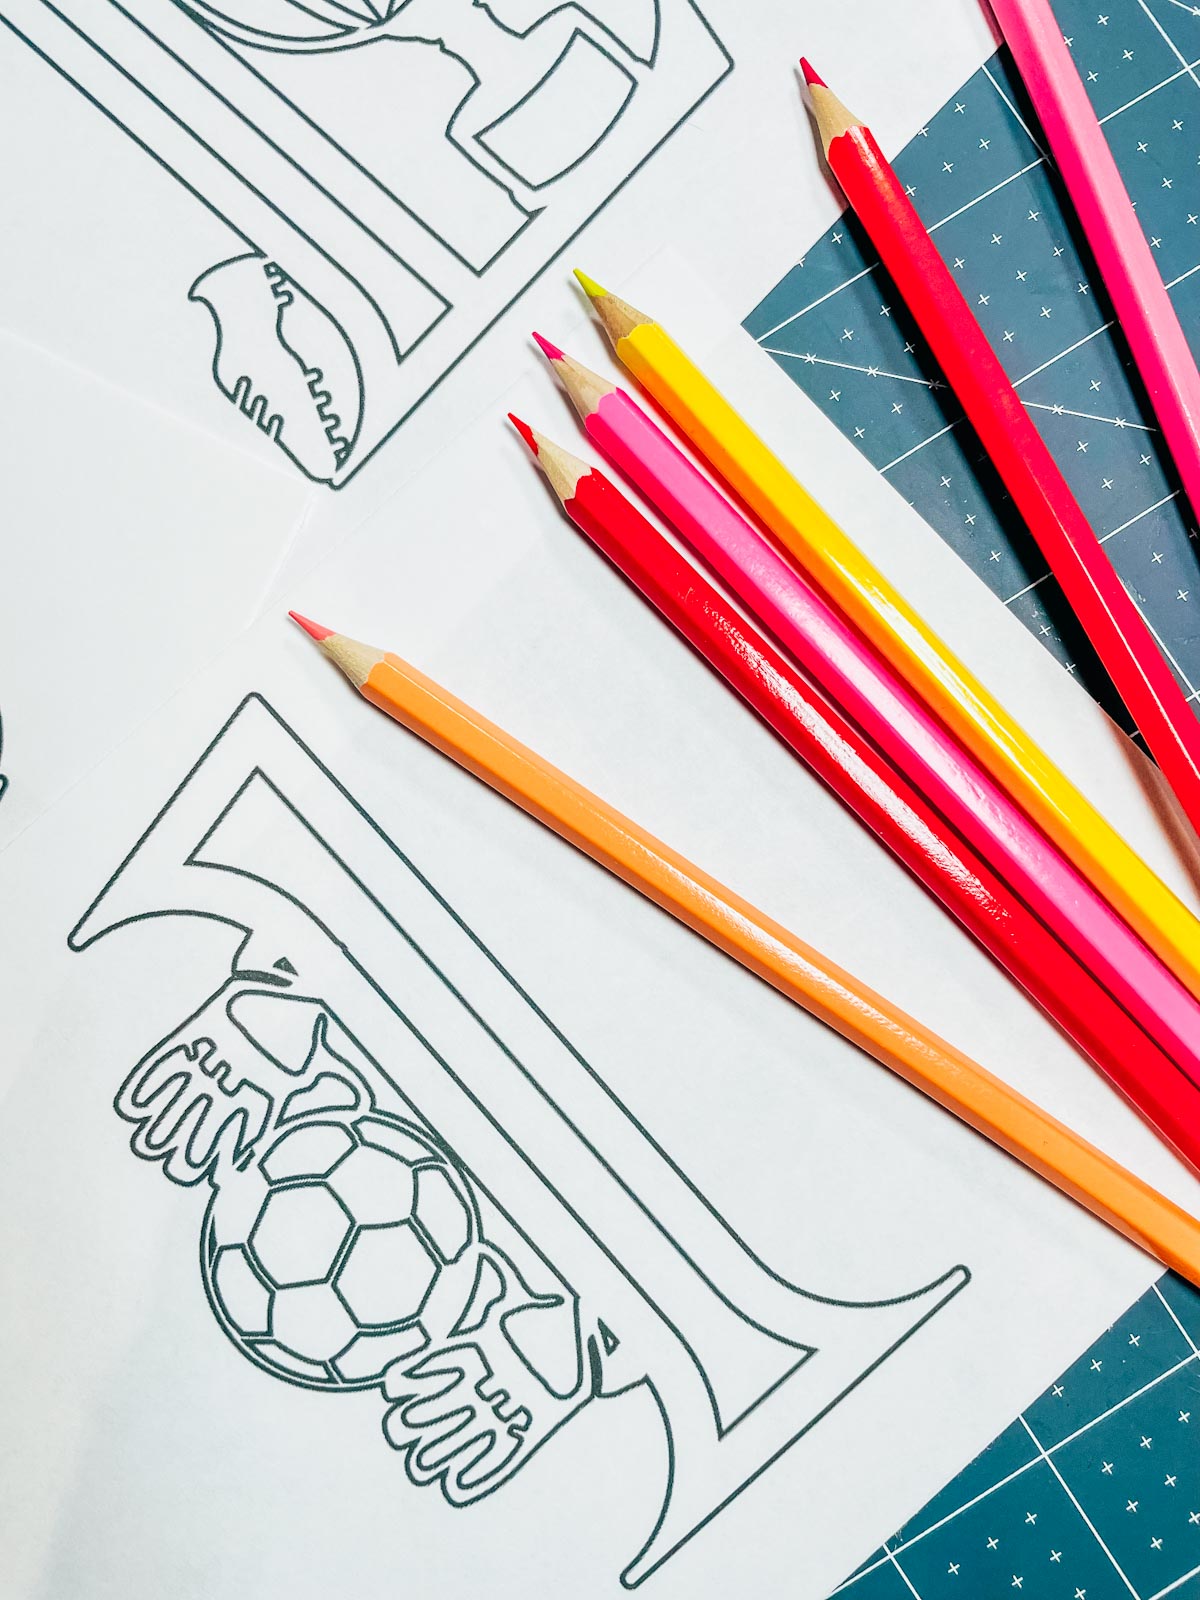 Free printable football colouring alphabet pages â extraordinary chaos